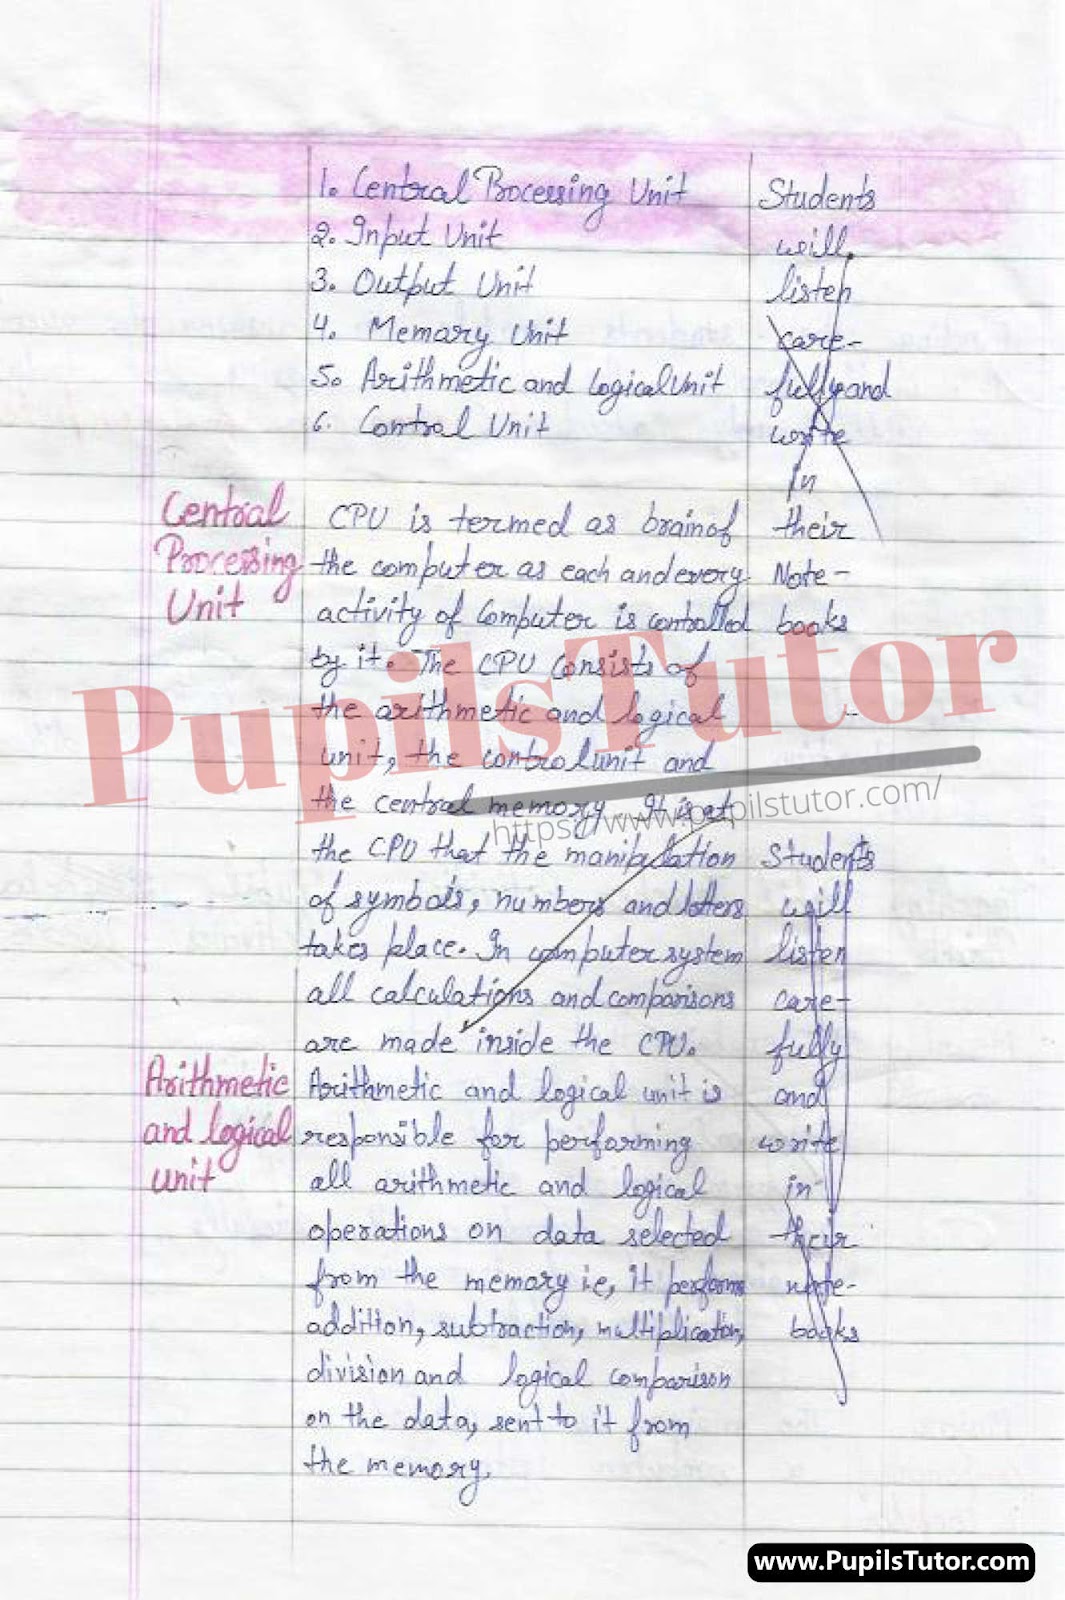 BED, DELED, BTC, BSTC, M.ED, DED And NIOS Teaching Of Computer Science Innovative Digital Lesson Plan Format On CPU, ALU And Control Unit Topic For Class 4th 5th 6th 7th 8th 9th, 10th, 11th, 12th  – [Page And Photo 4] – pupilstutor.com